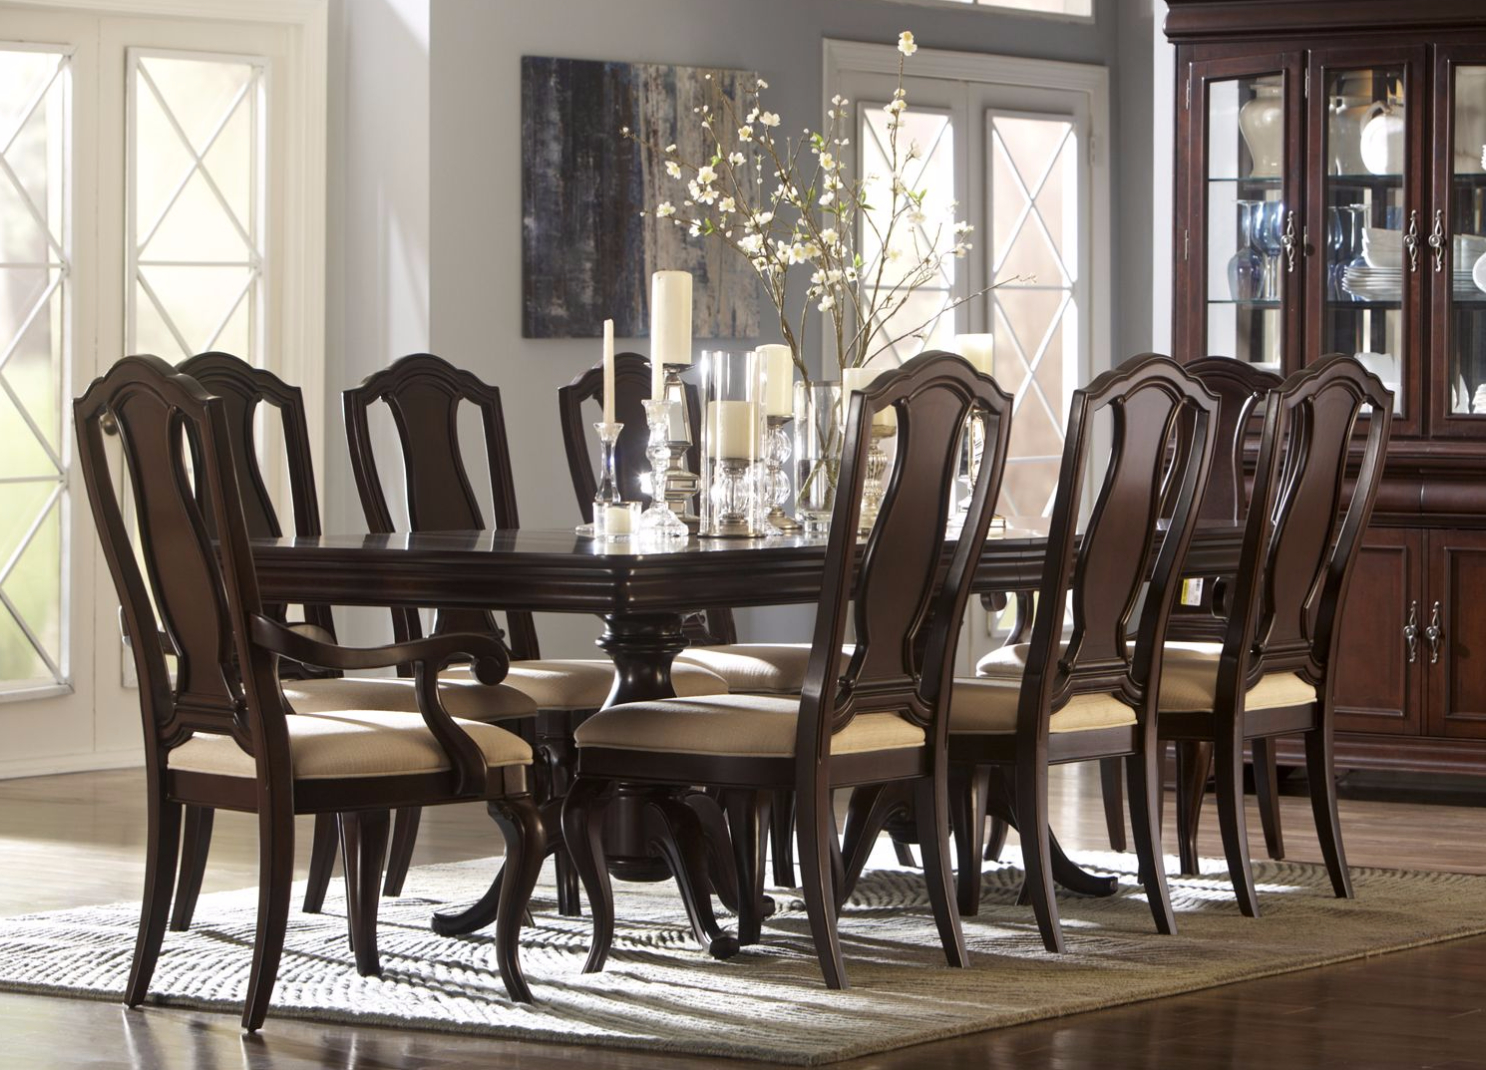 Dining Room Table Chairs Havertys Orleans Dining Room with size 1486 X 1070